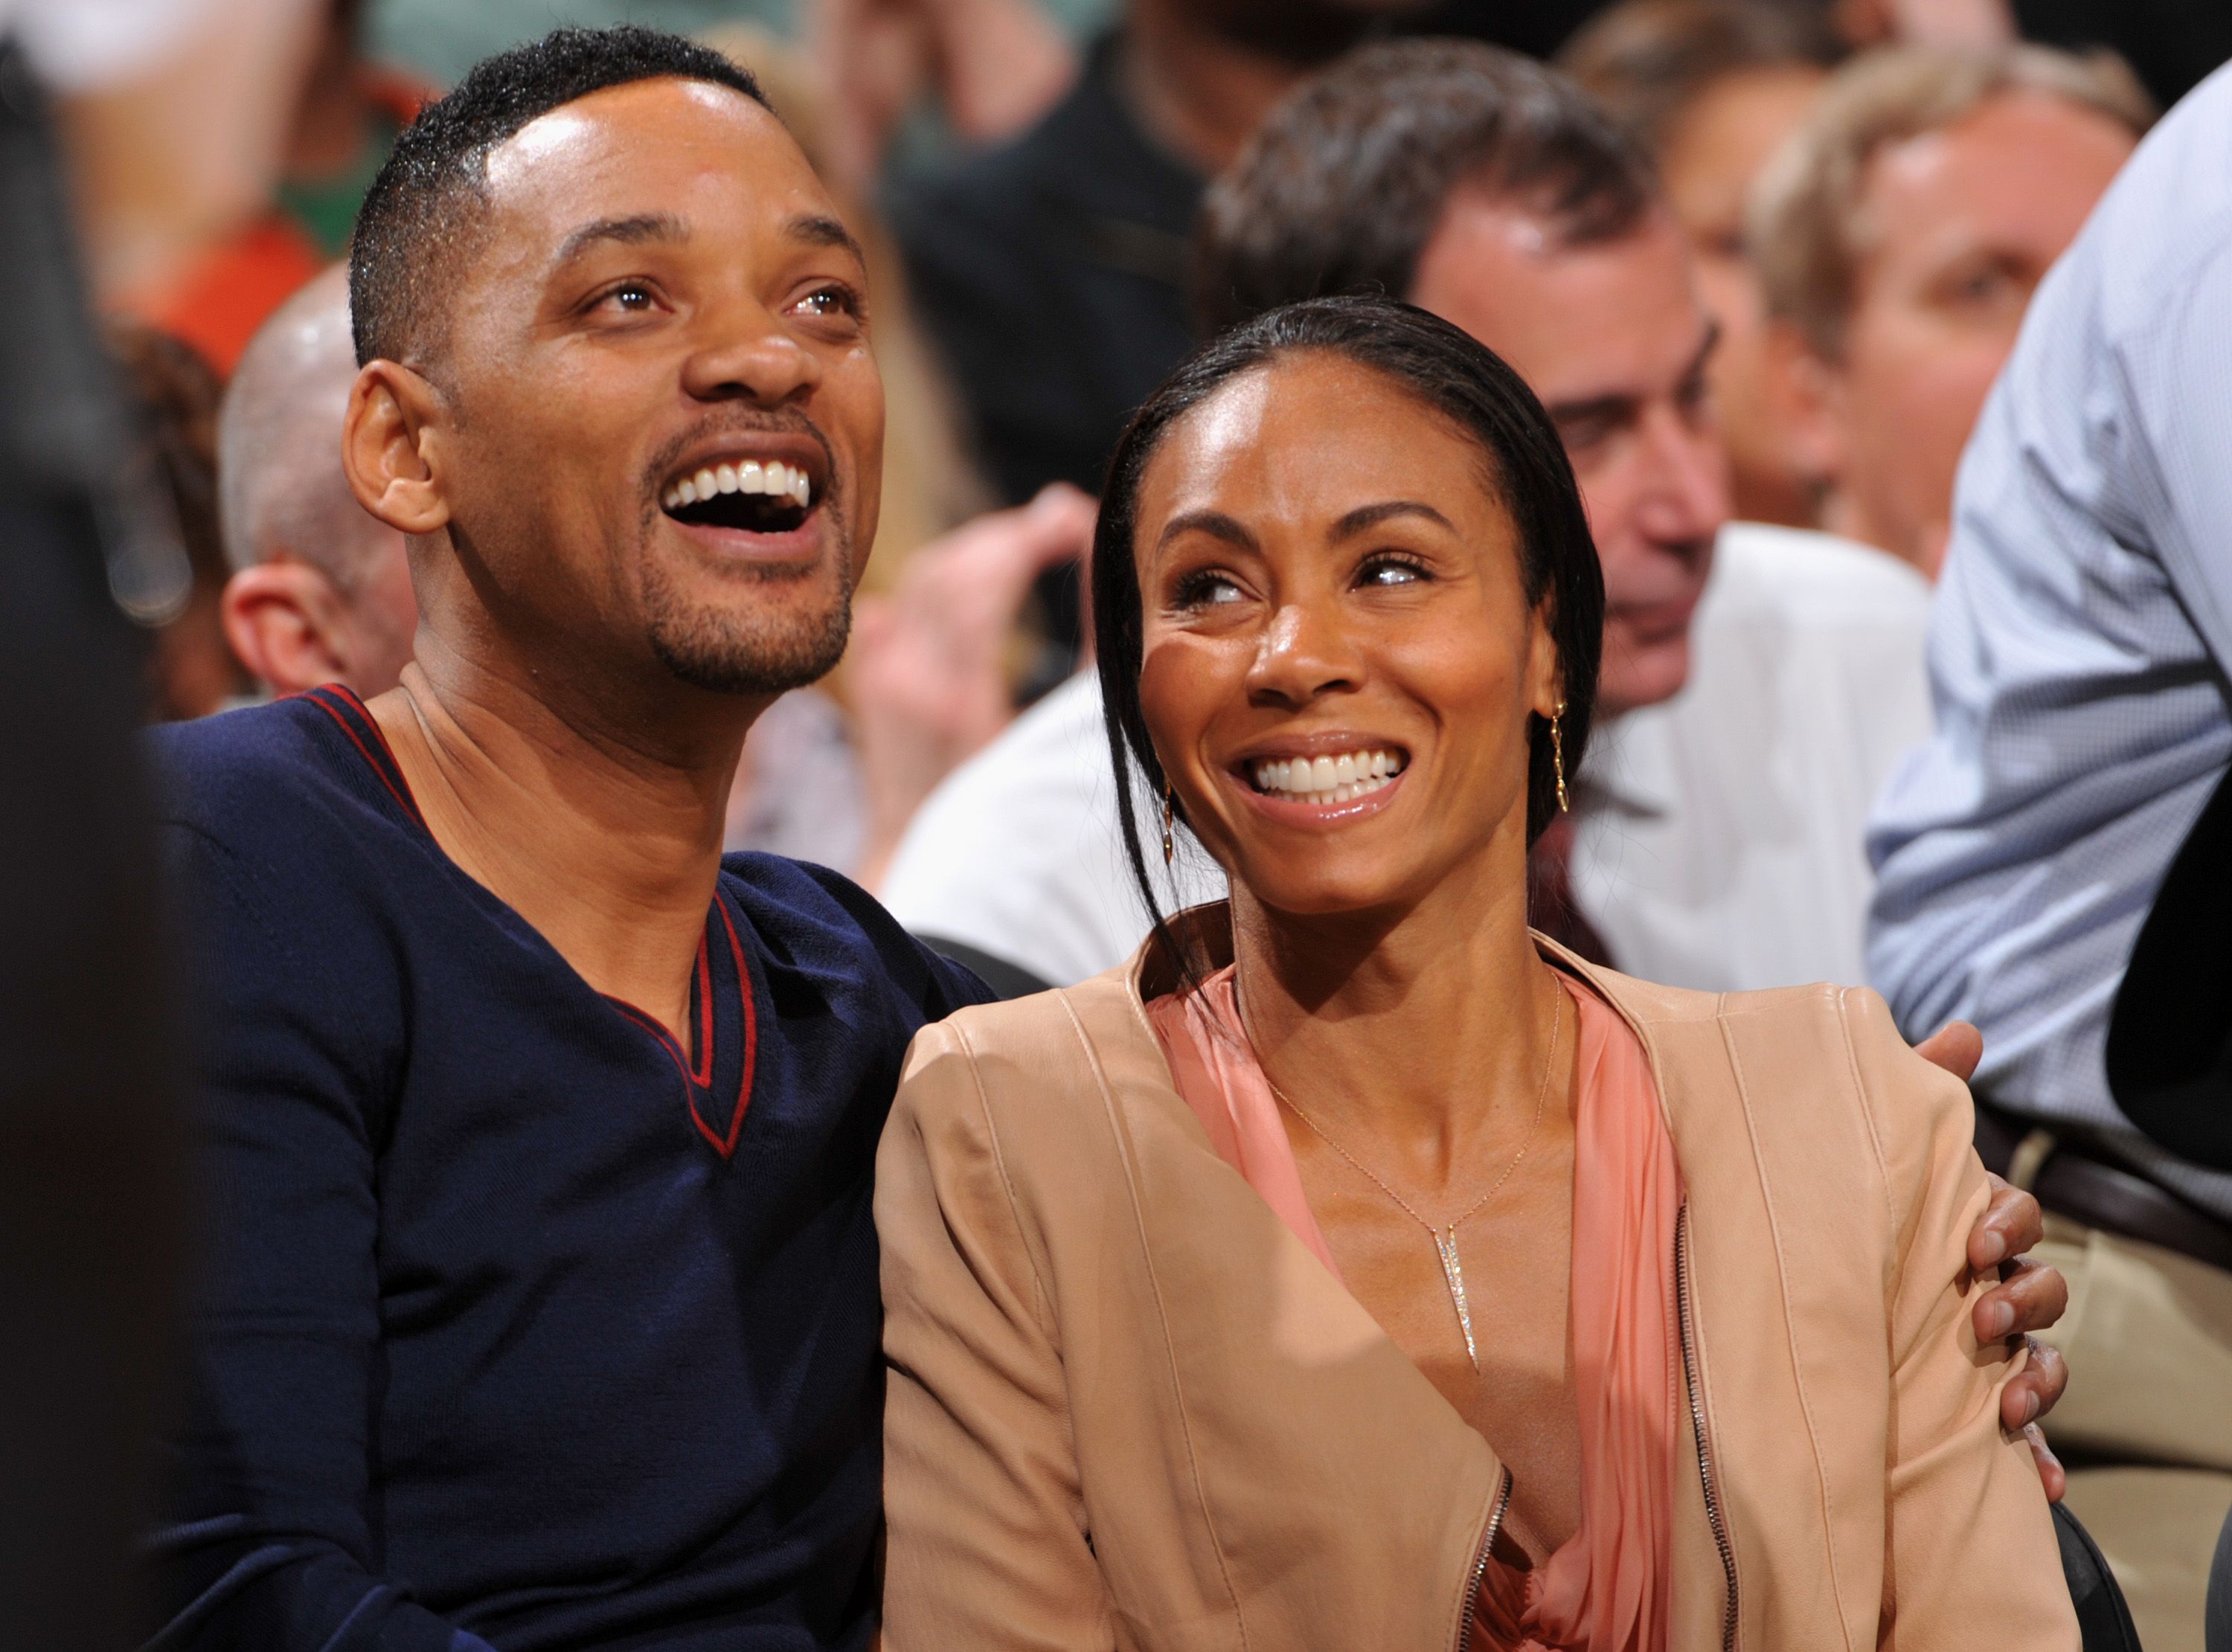 Will Smith and Jada Pinkett watch Game Five of the Eastern Conference Semifinals between the Philadelphia 76ers and Boston Celtics during the 2012 NBA Playoffs on May 21, 2012 at the TD Garden in Boston, Massachusetts. | Source: Getty Images